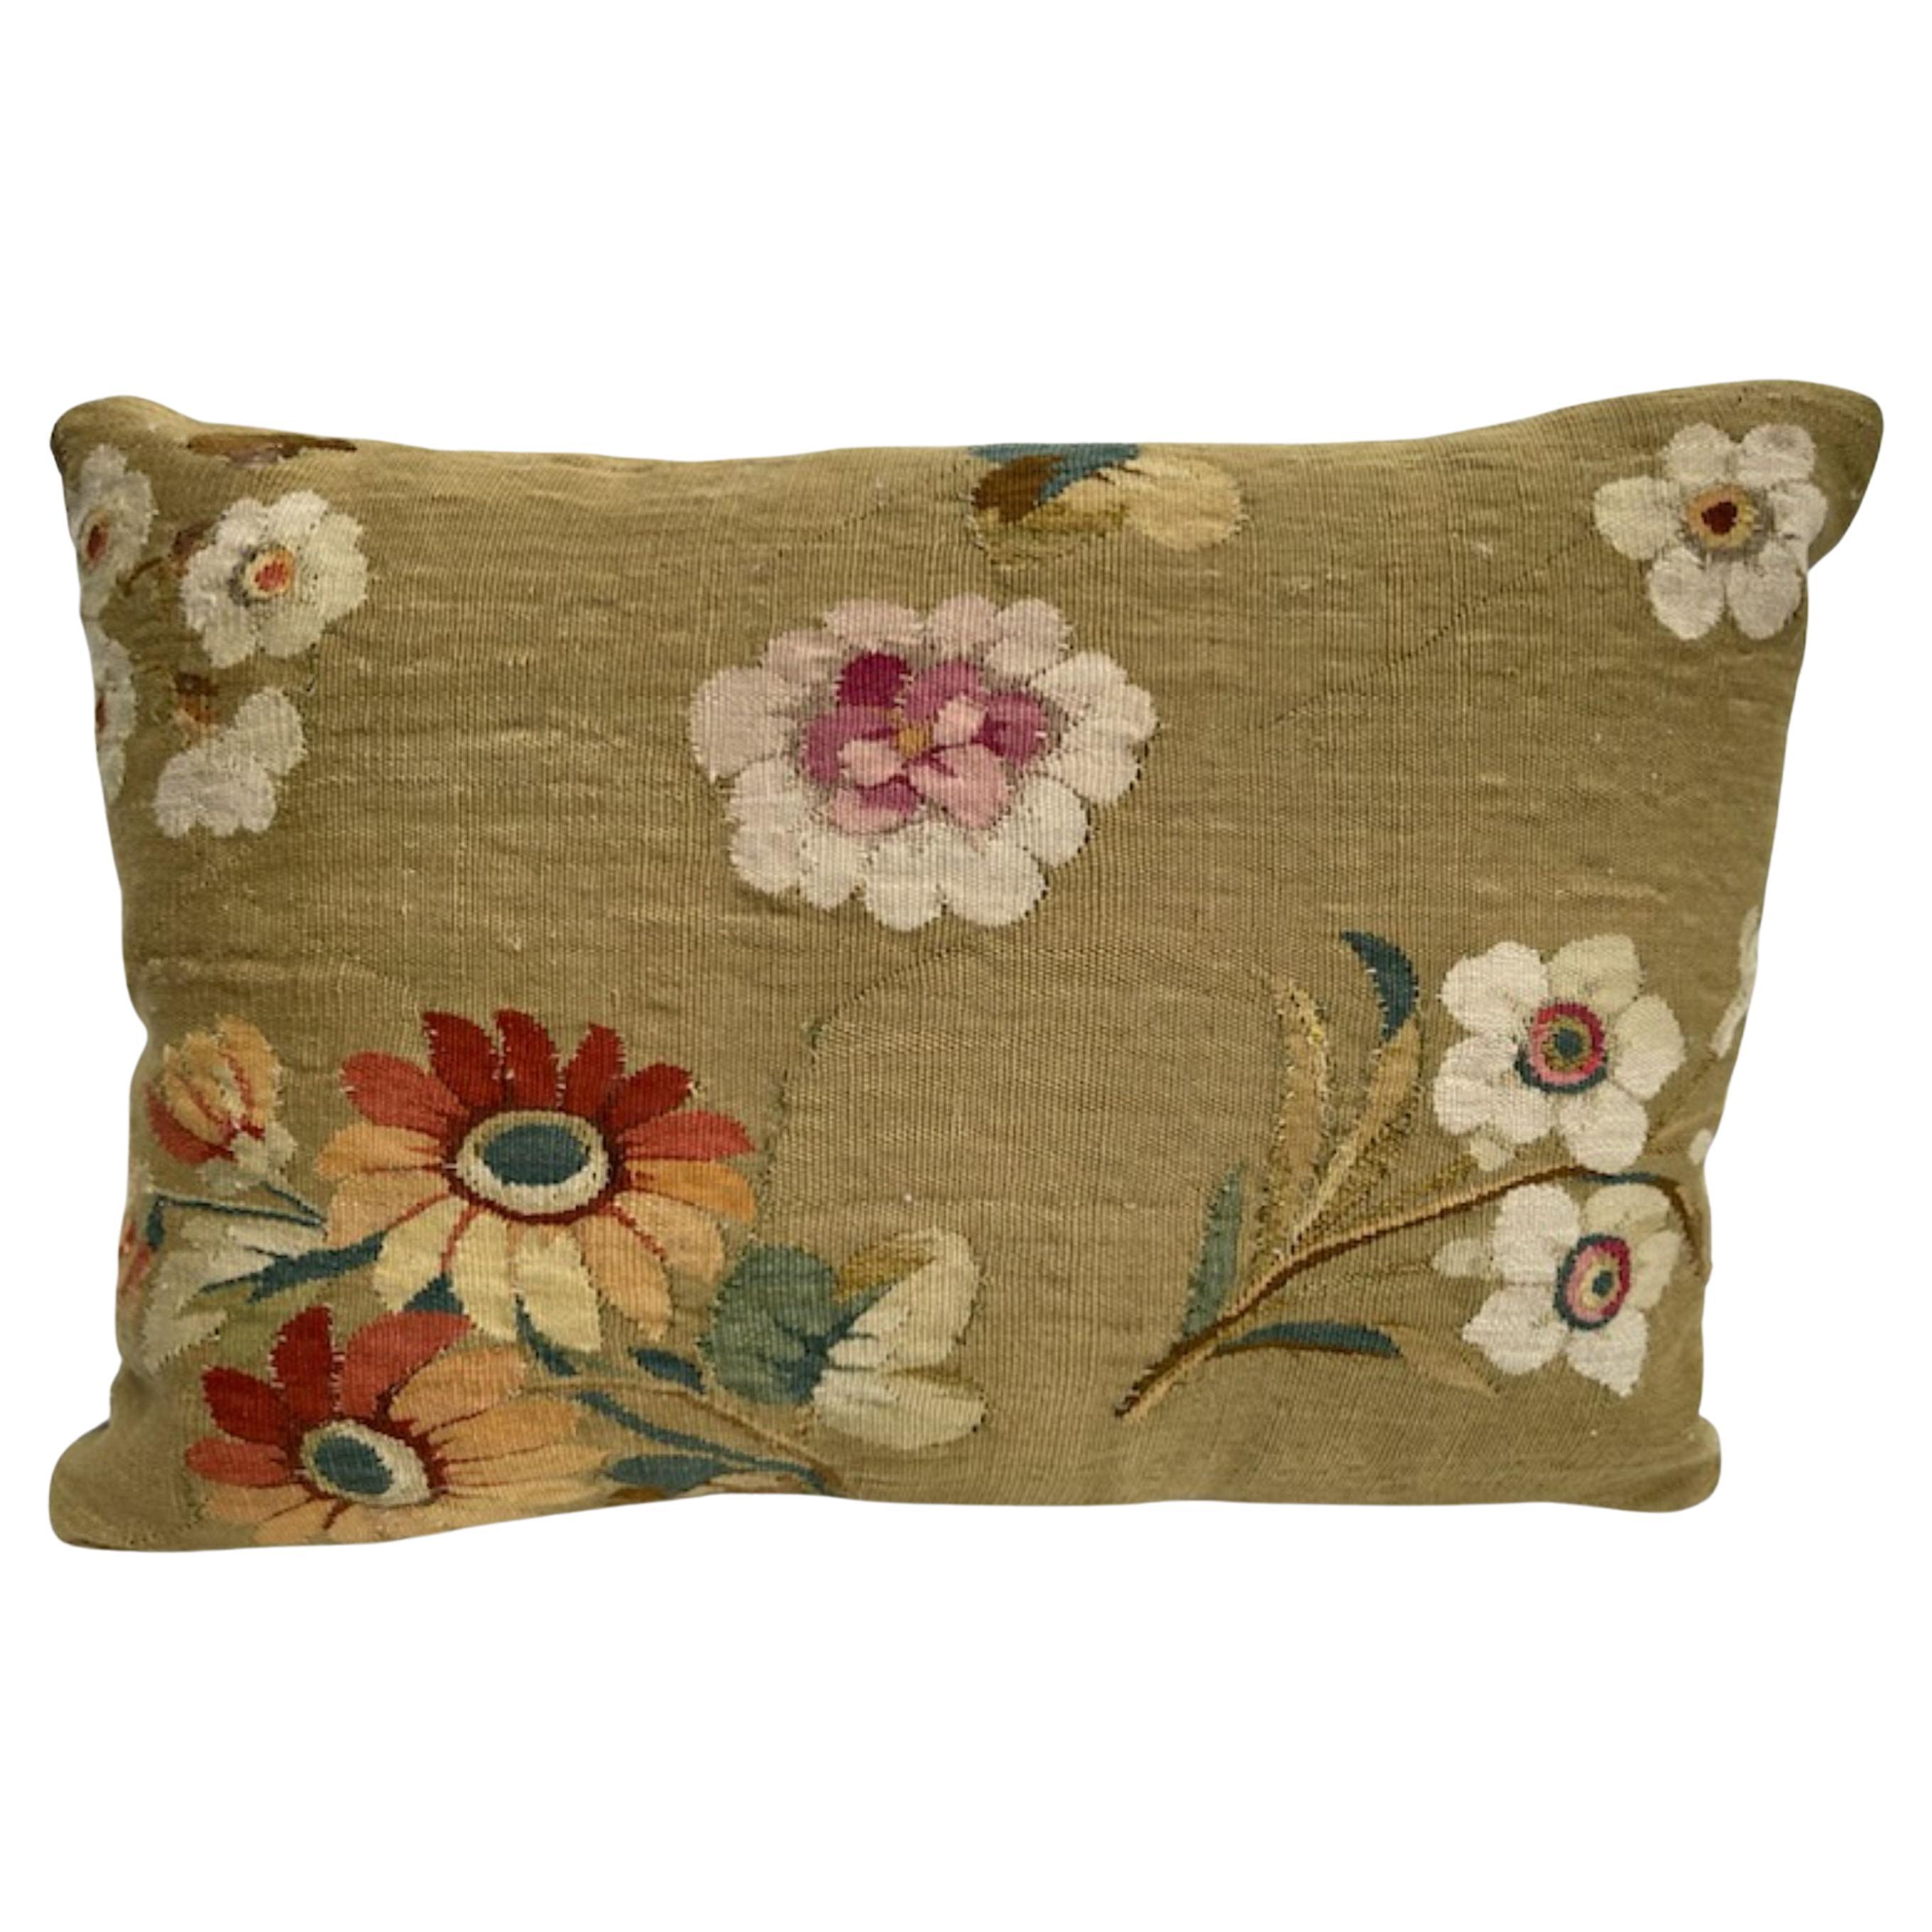 Mid 18th Century French Aubusson Tapestry Pillow For Sale